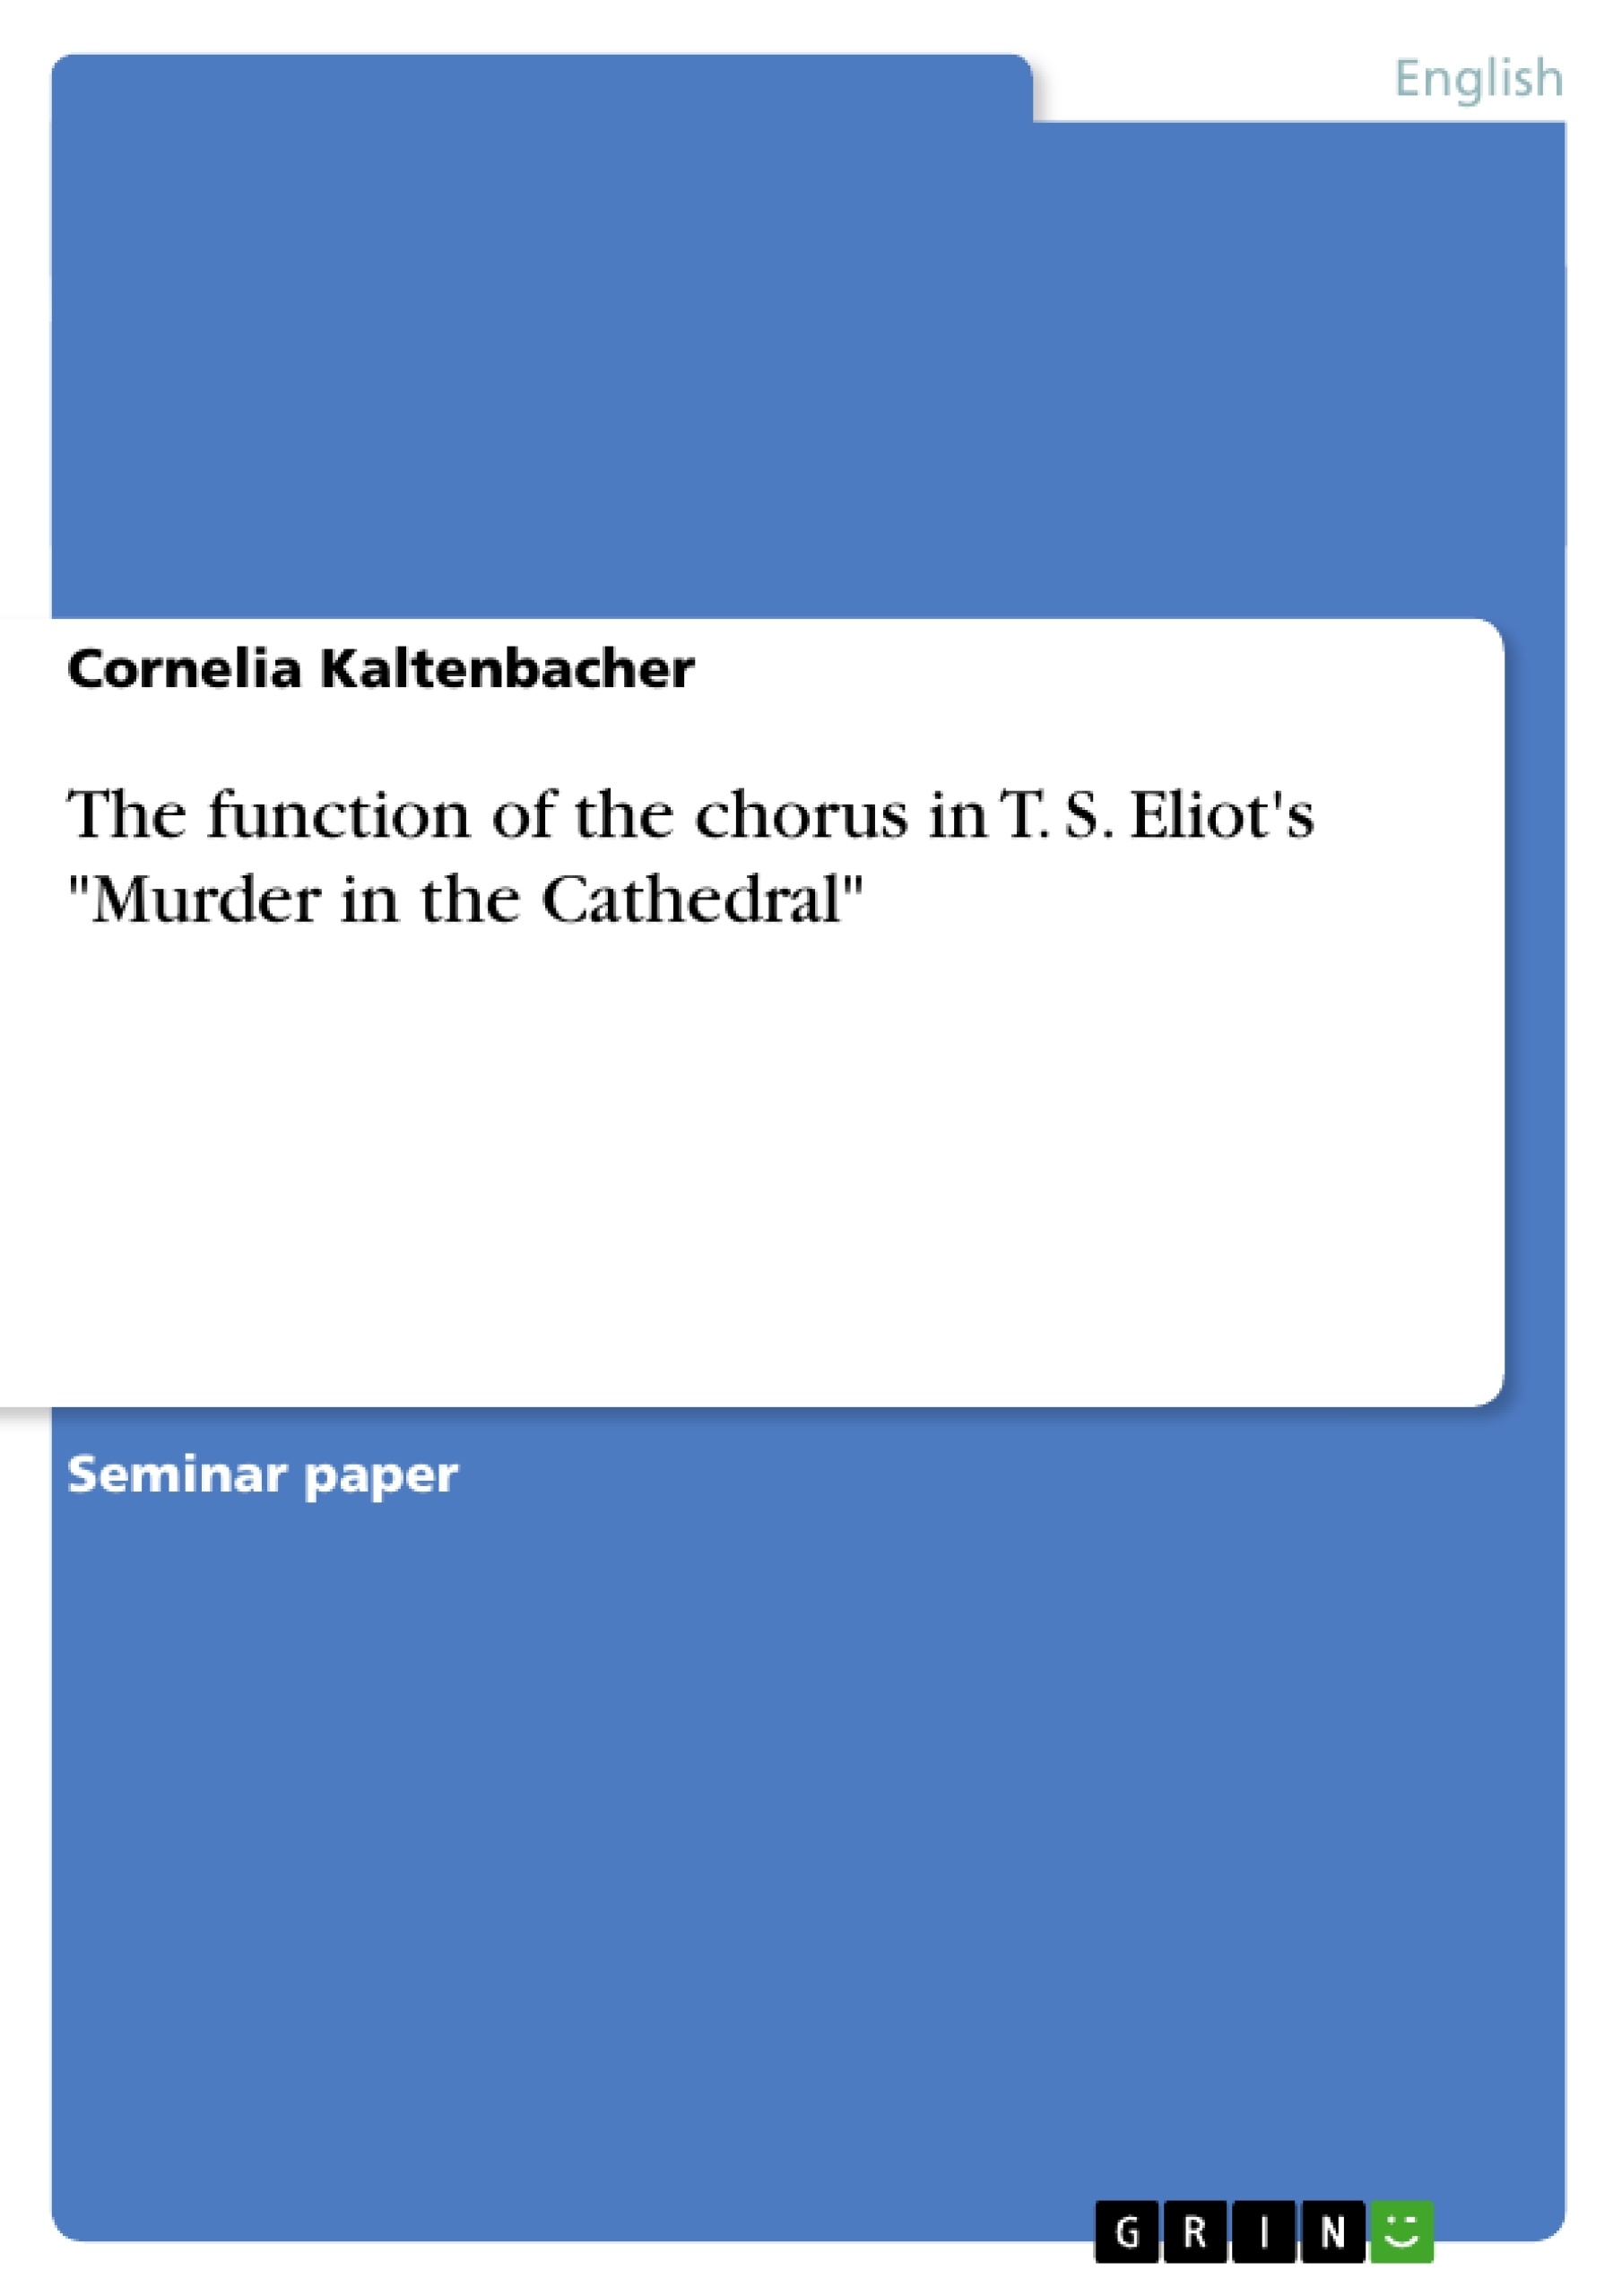 Titre: The function of the chorus in T. S. Eliot's "Murder in the Cathedral"